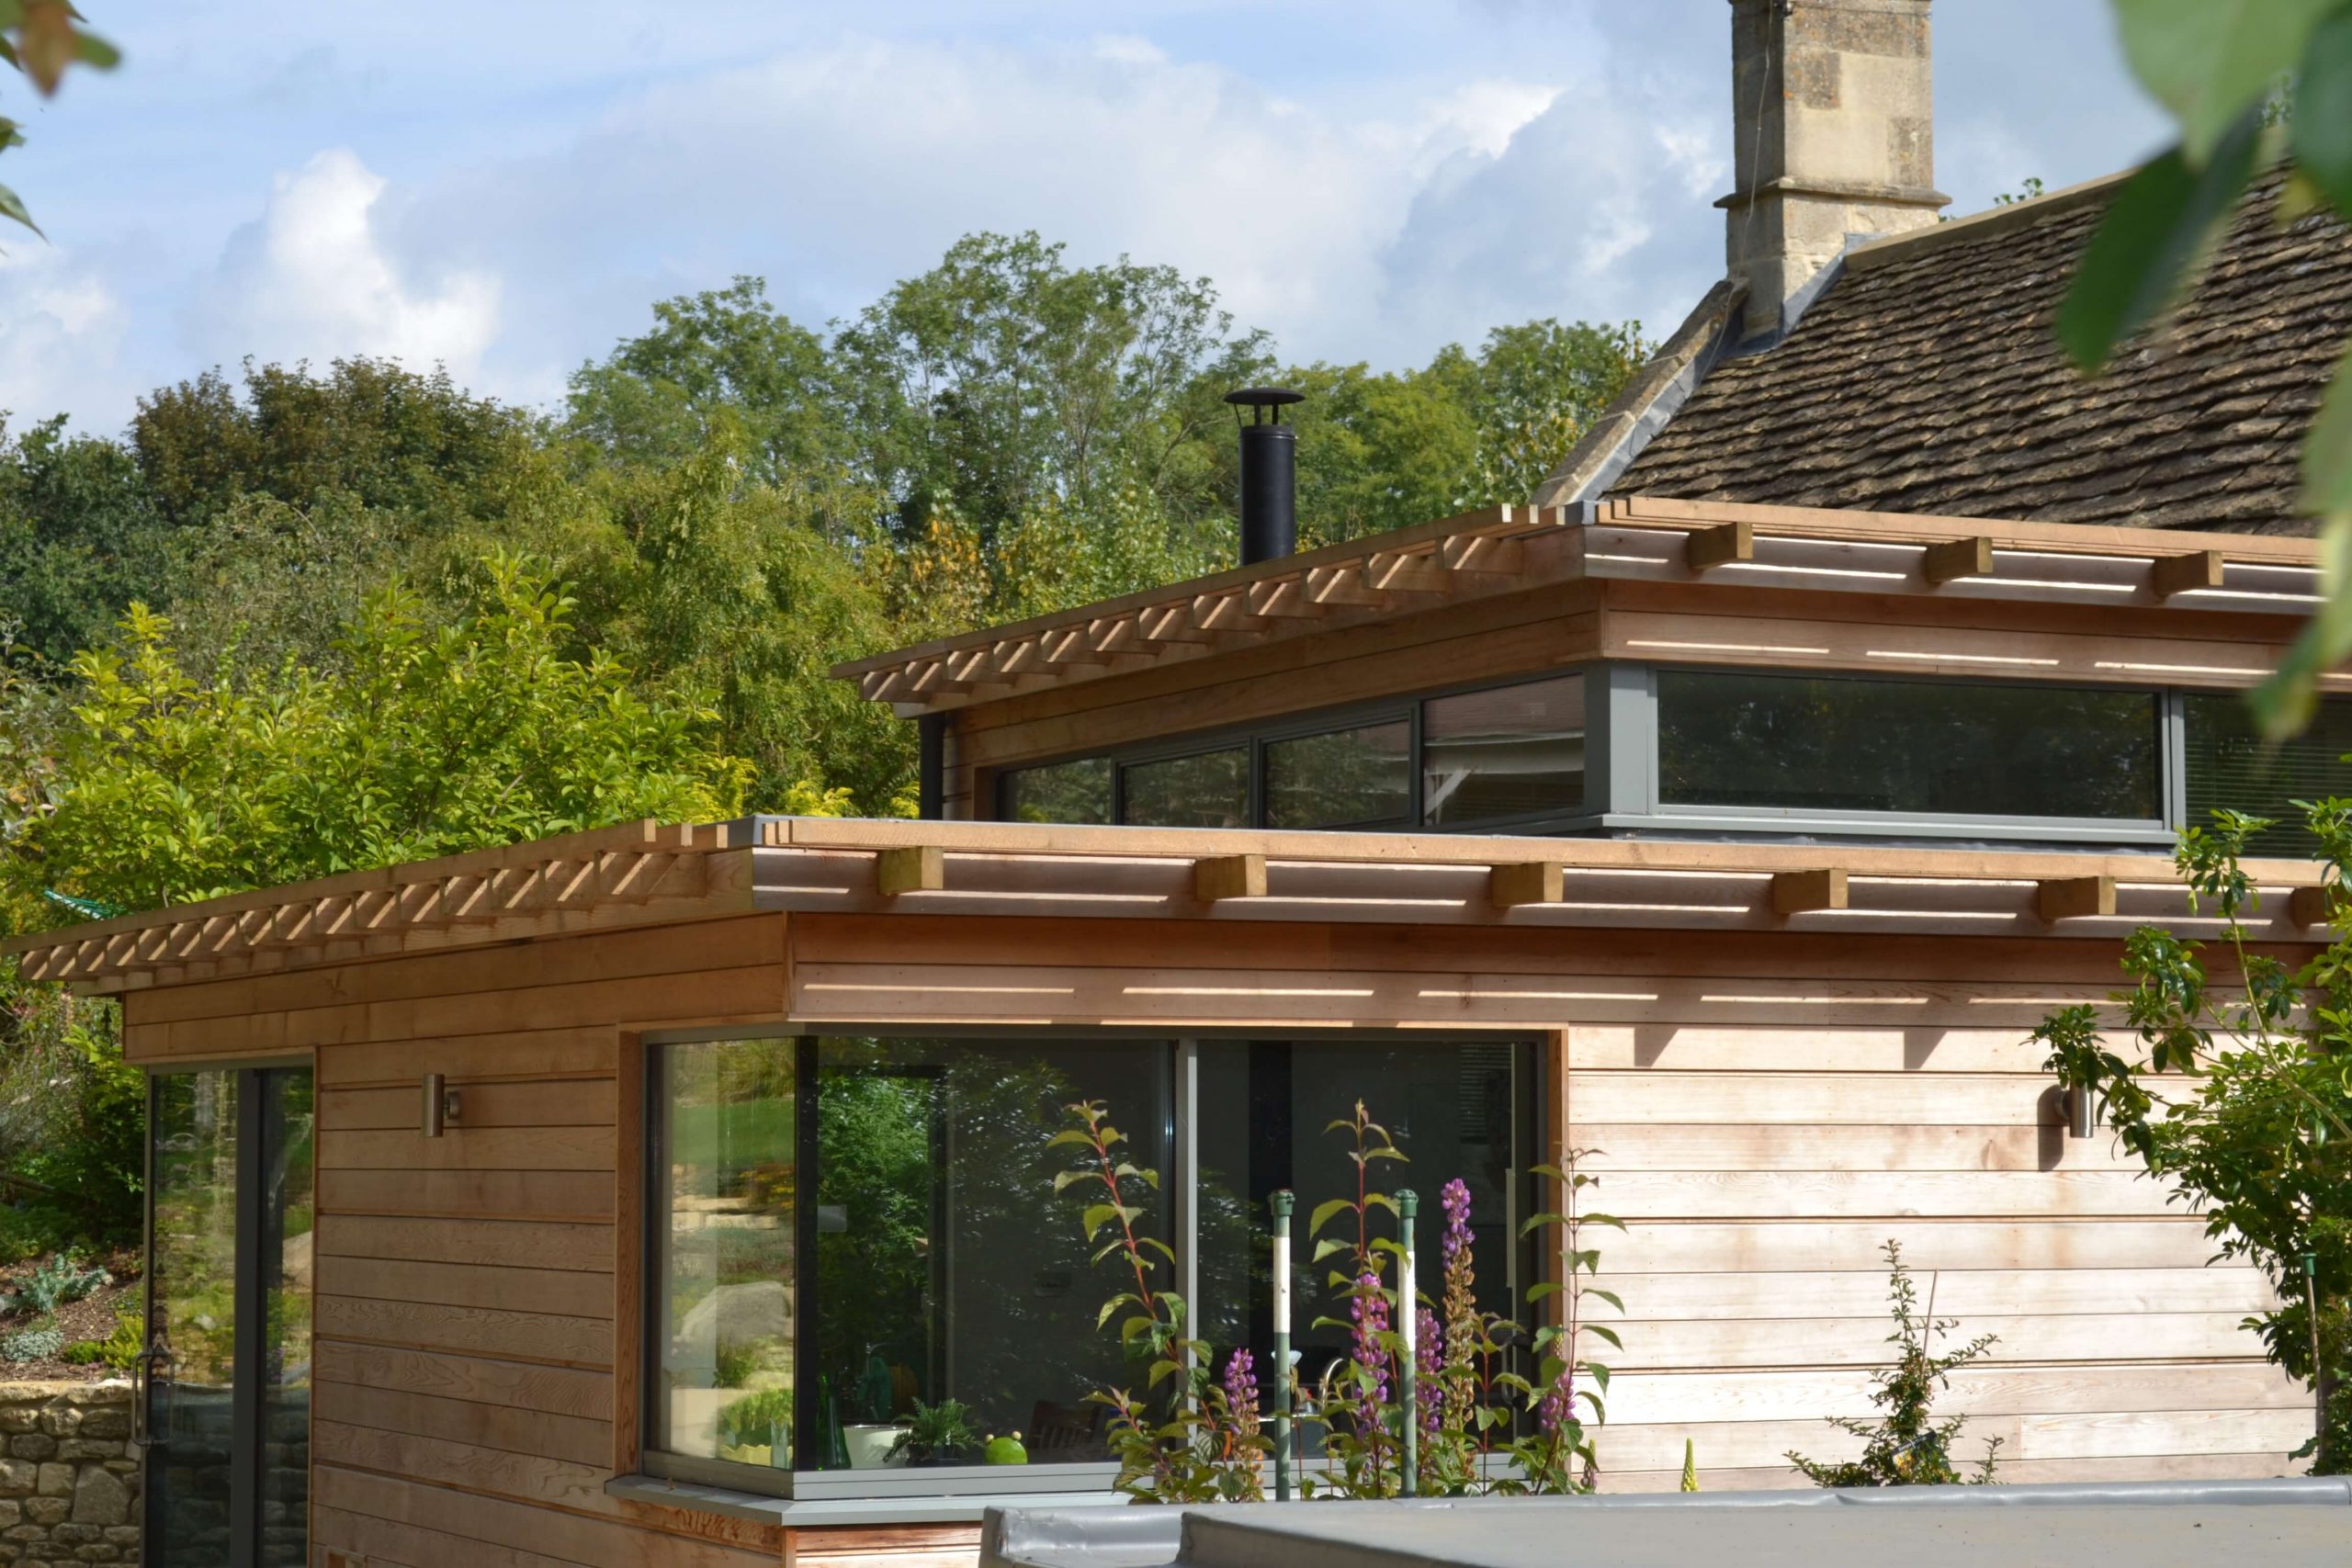 elegant timber clad extension to historic building